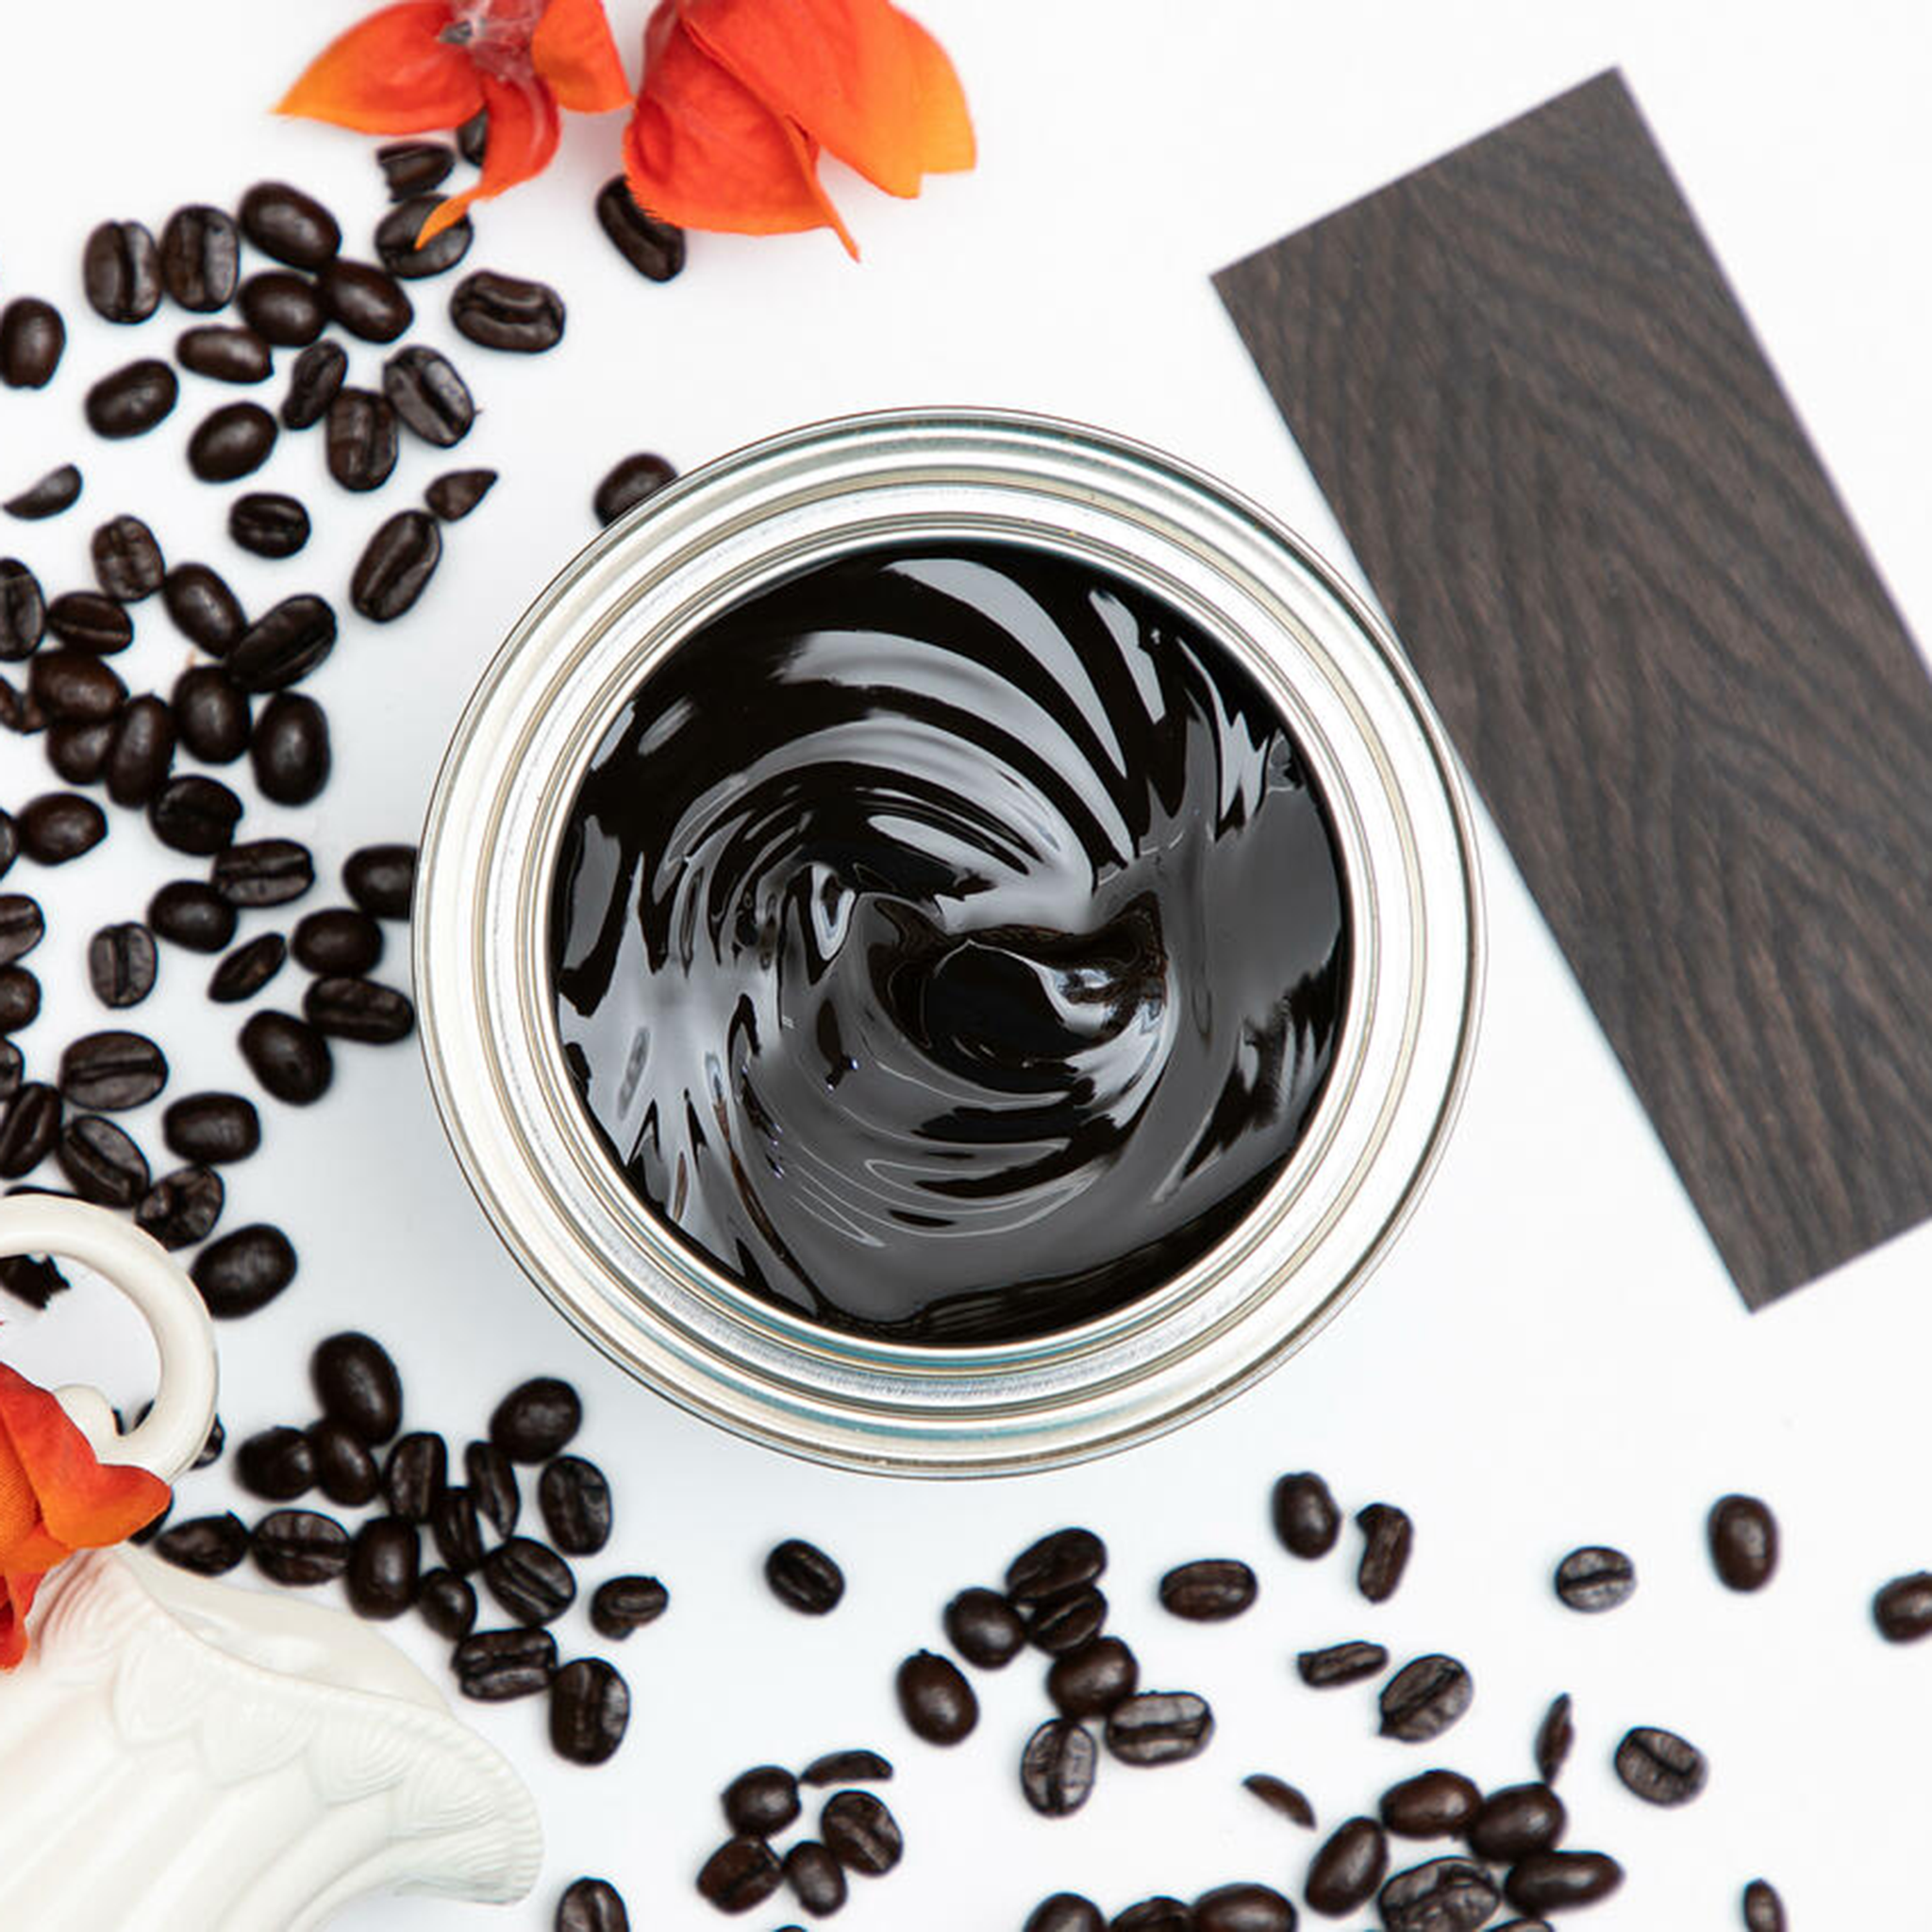 A arial view of an open can of Dixie Belle's No Pain Gel Stain in Espresso is against a white background. The can is surrounded by espresso beans, red-orange flowers, and a wood swatch featuring the stain color.